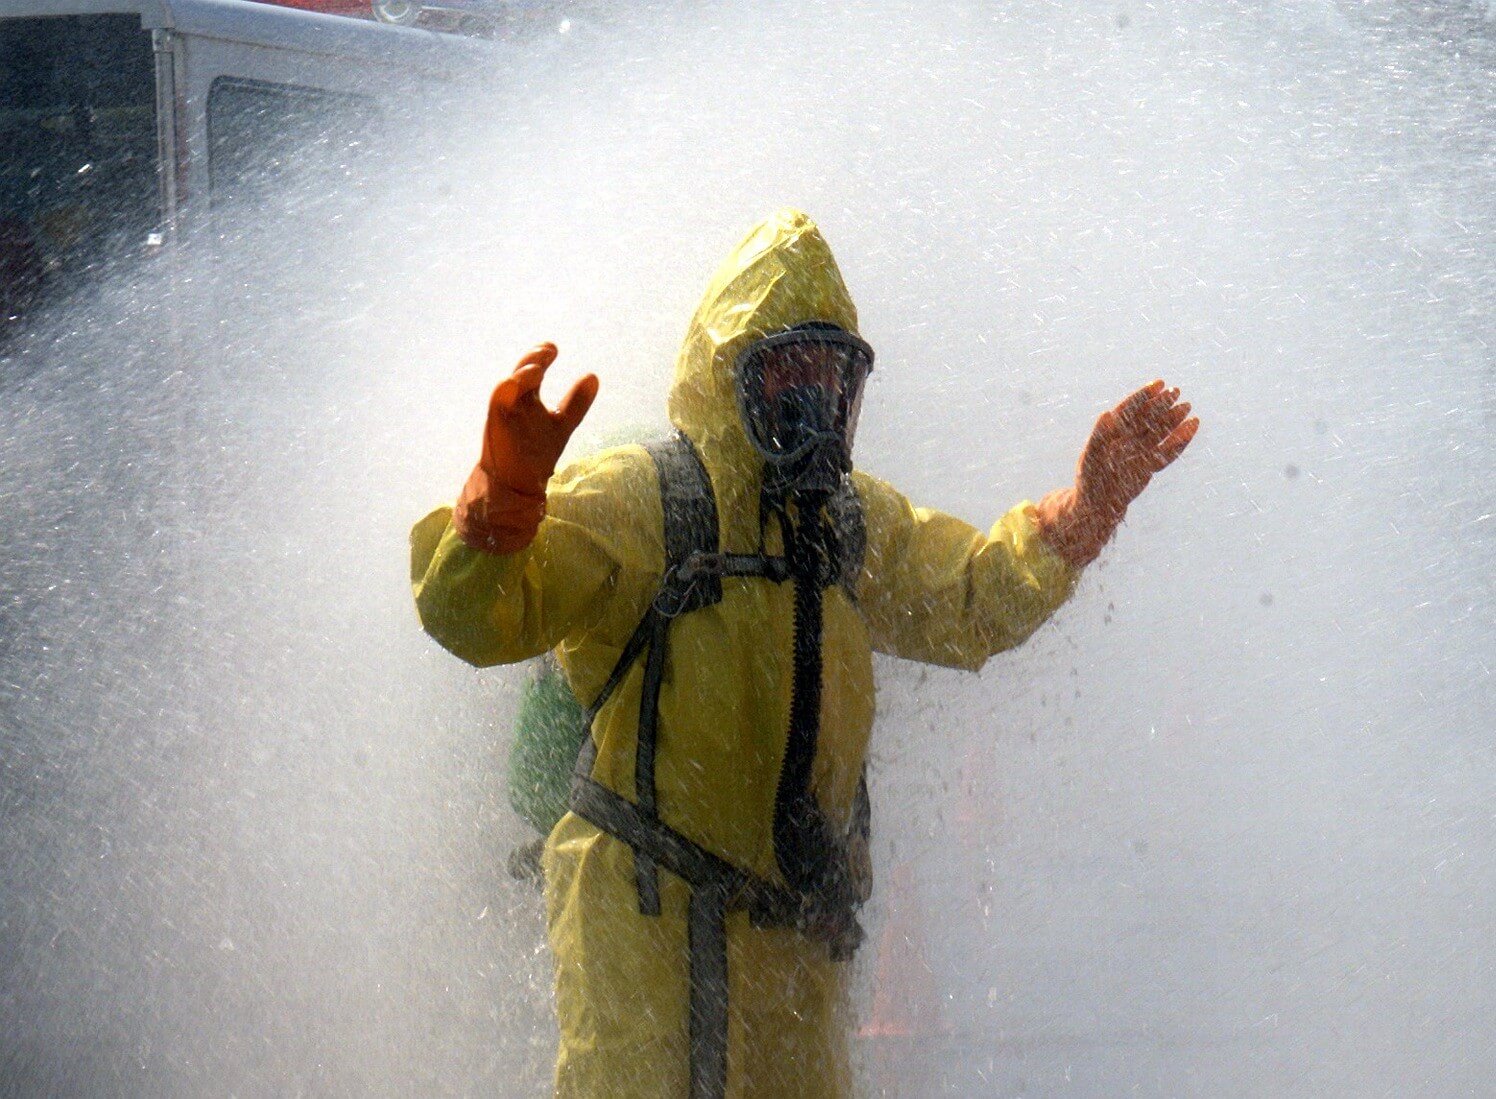 Chemical protective clothing: Part I